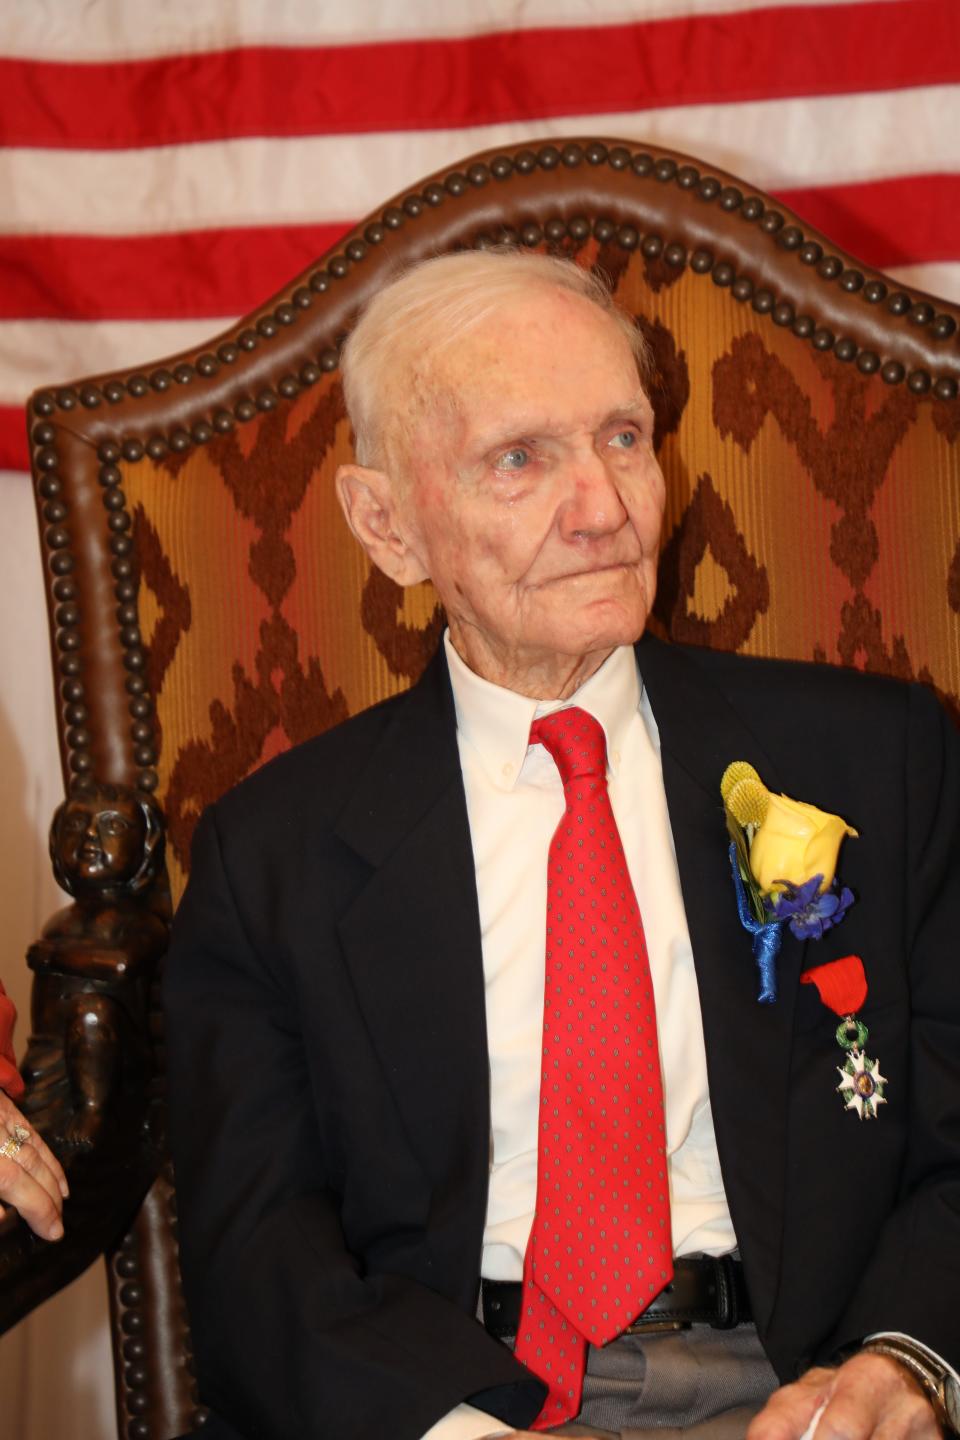 Herbert St. Romain Jr., celebrated his 100th birthday with more than 60 family and friends Sunday at Hotel Bentley. On his jacket, he wears the Legion of Honour which was awarded to him by the French government for his service in World War II. It is the highest French order of merit for military and civil service.